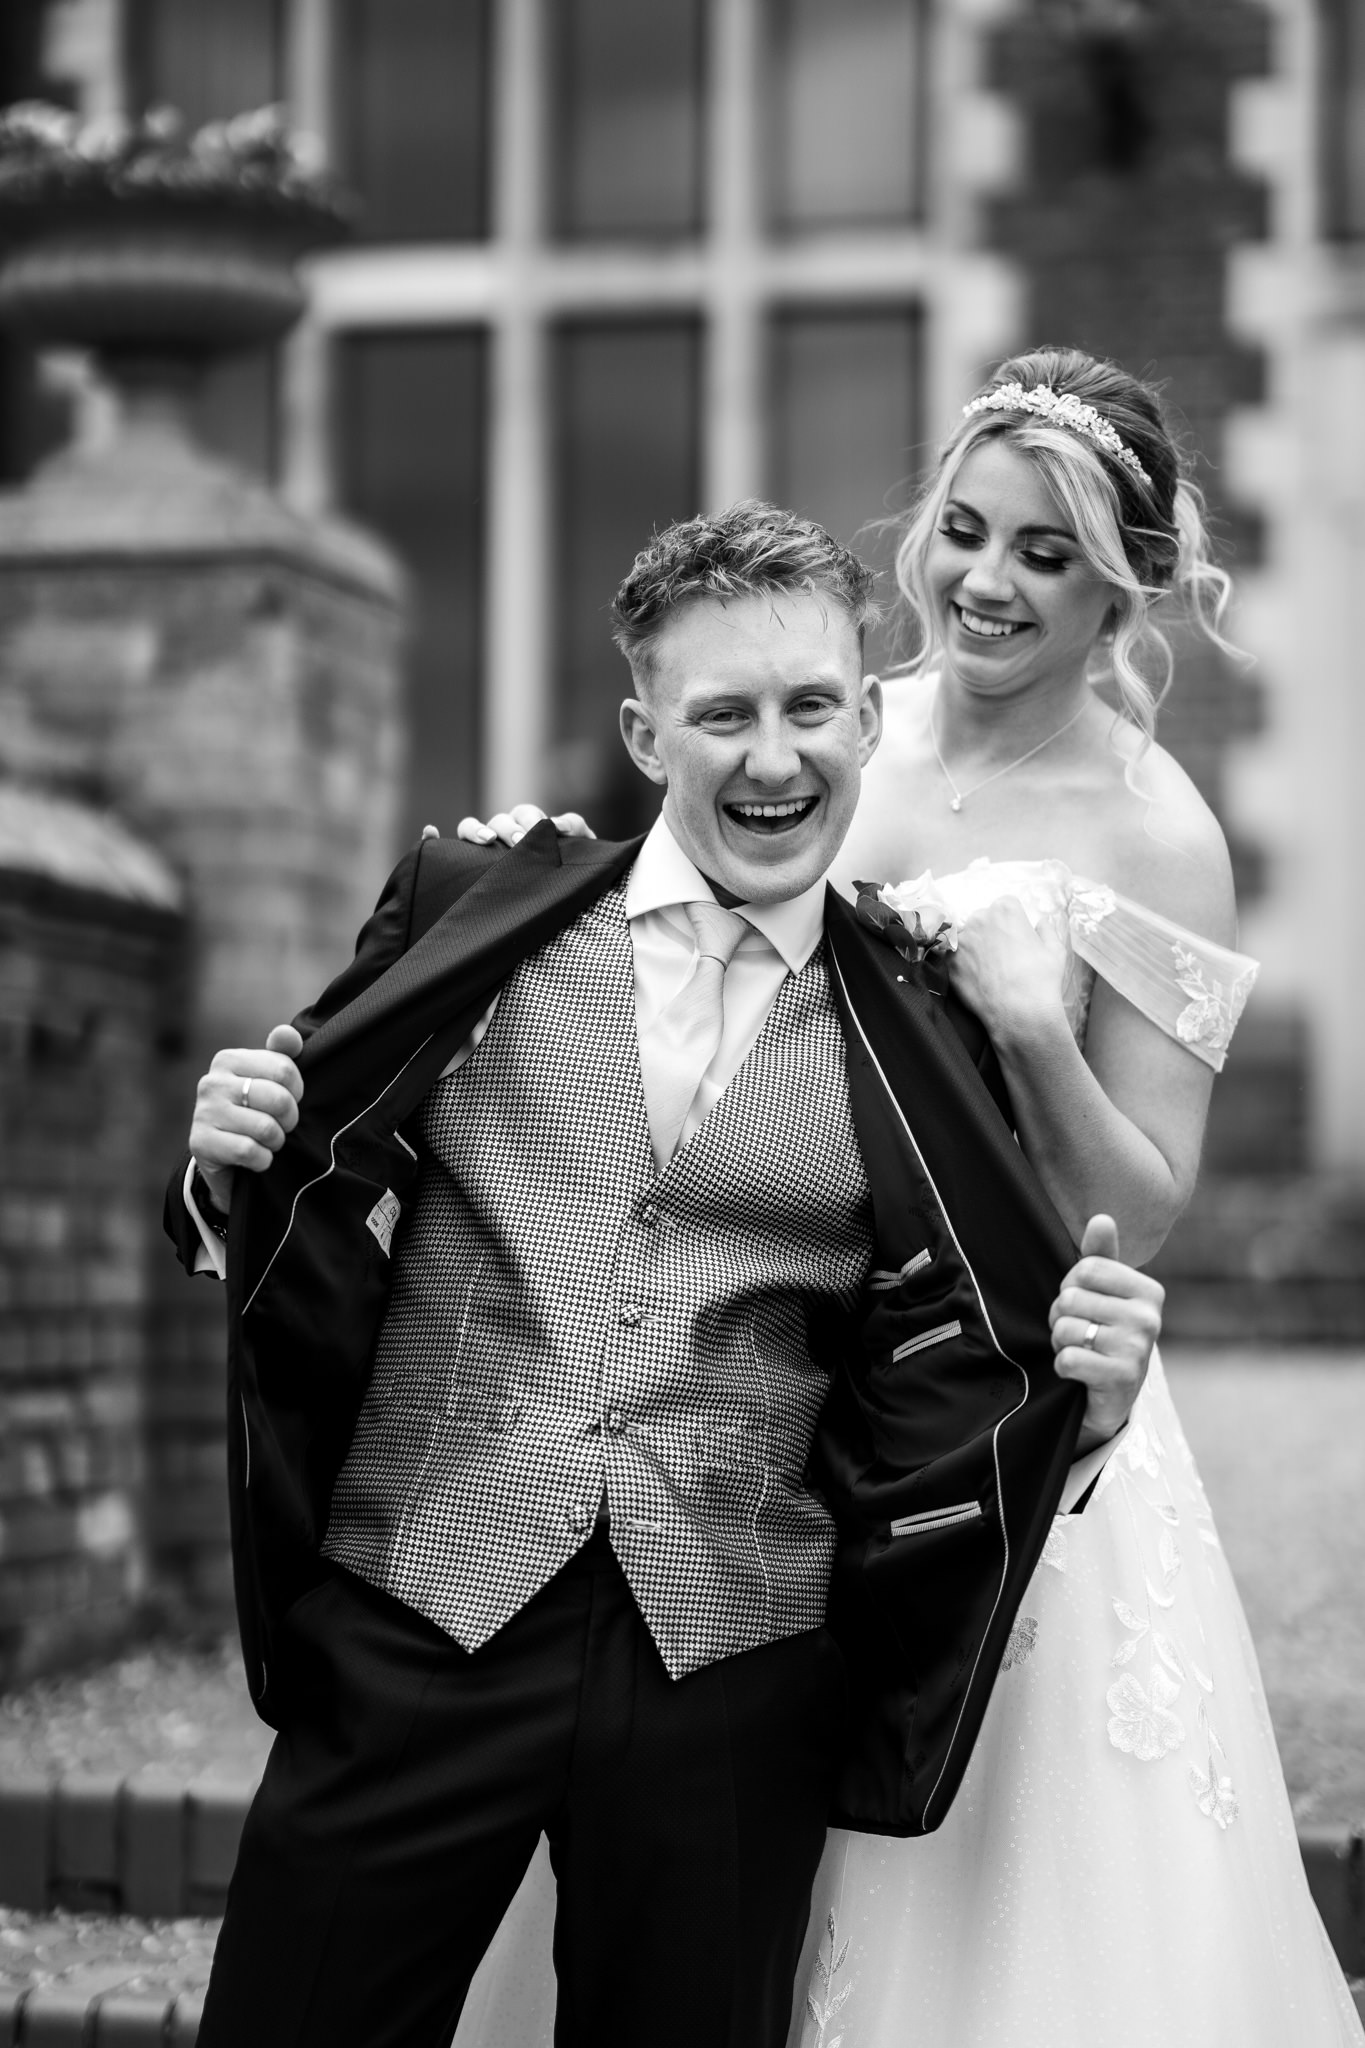 Fun wedding couple shots in black and white at Dunston Hall, Norfolk